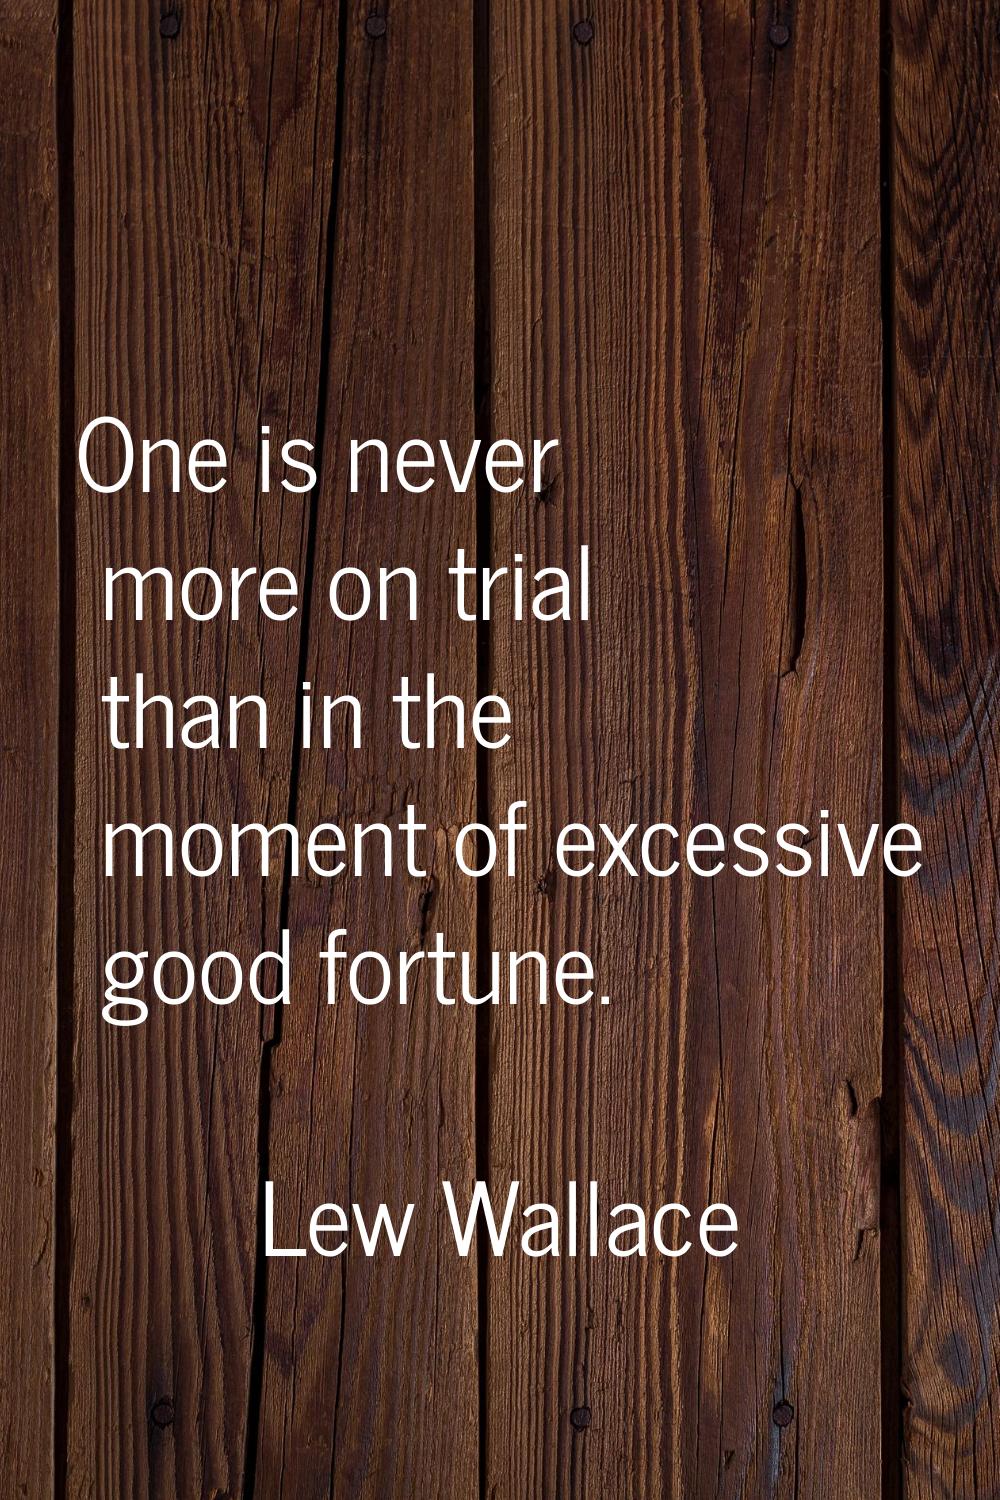 One is never more on trial than in the moment of excessive good fortune.